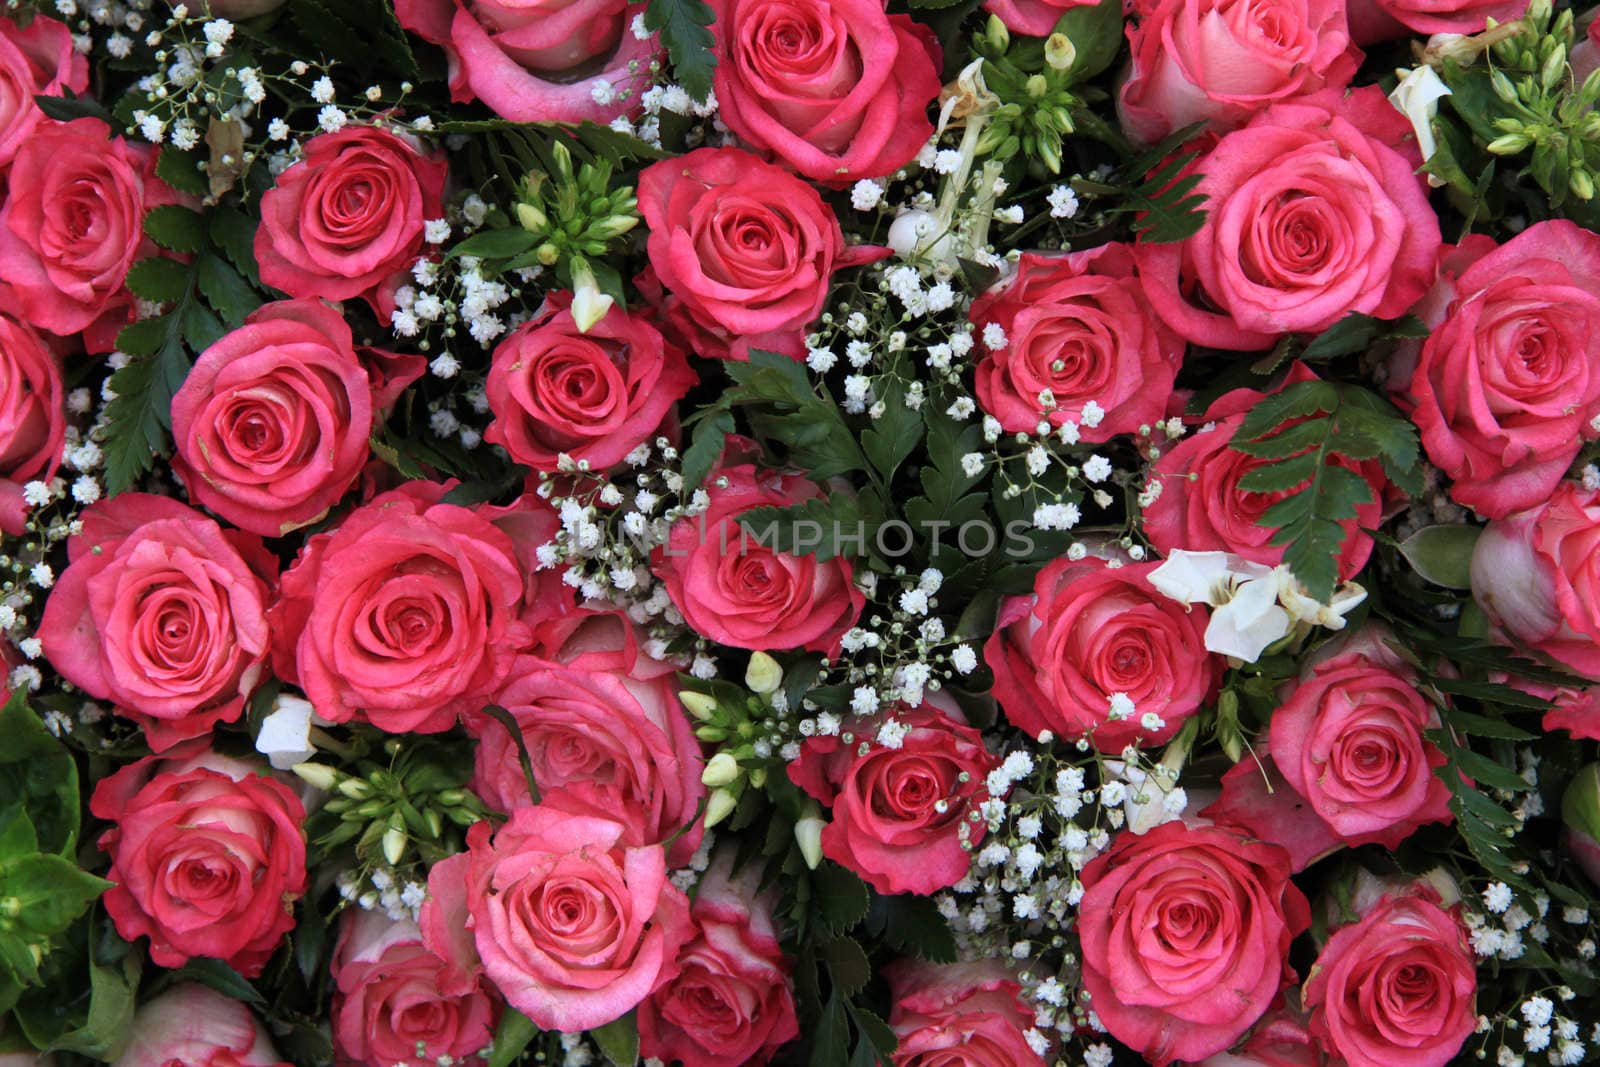 Floral arrangement with pink roses and gypsophila or baby's breath